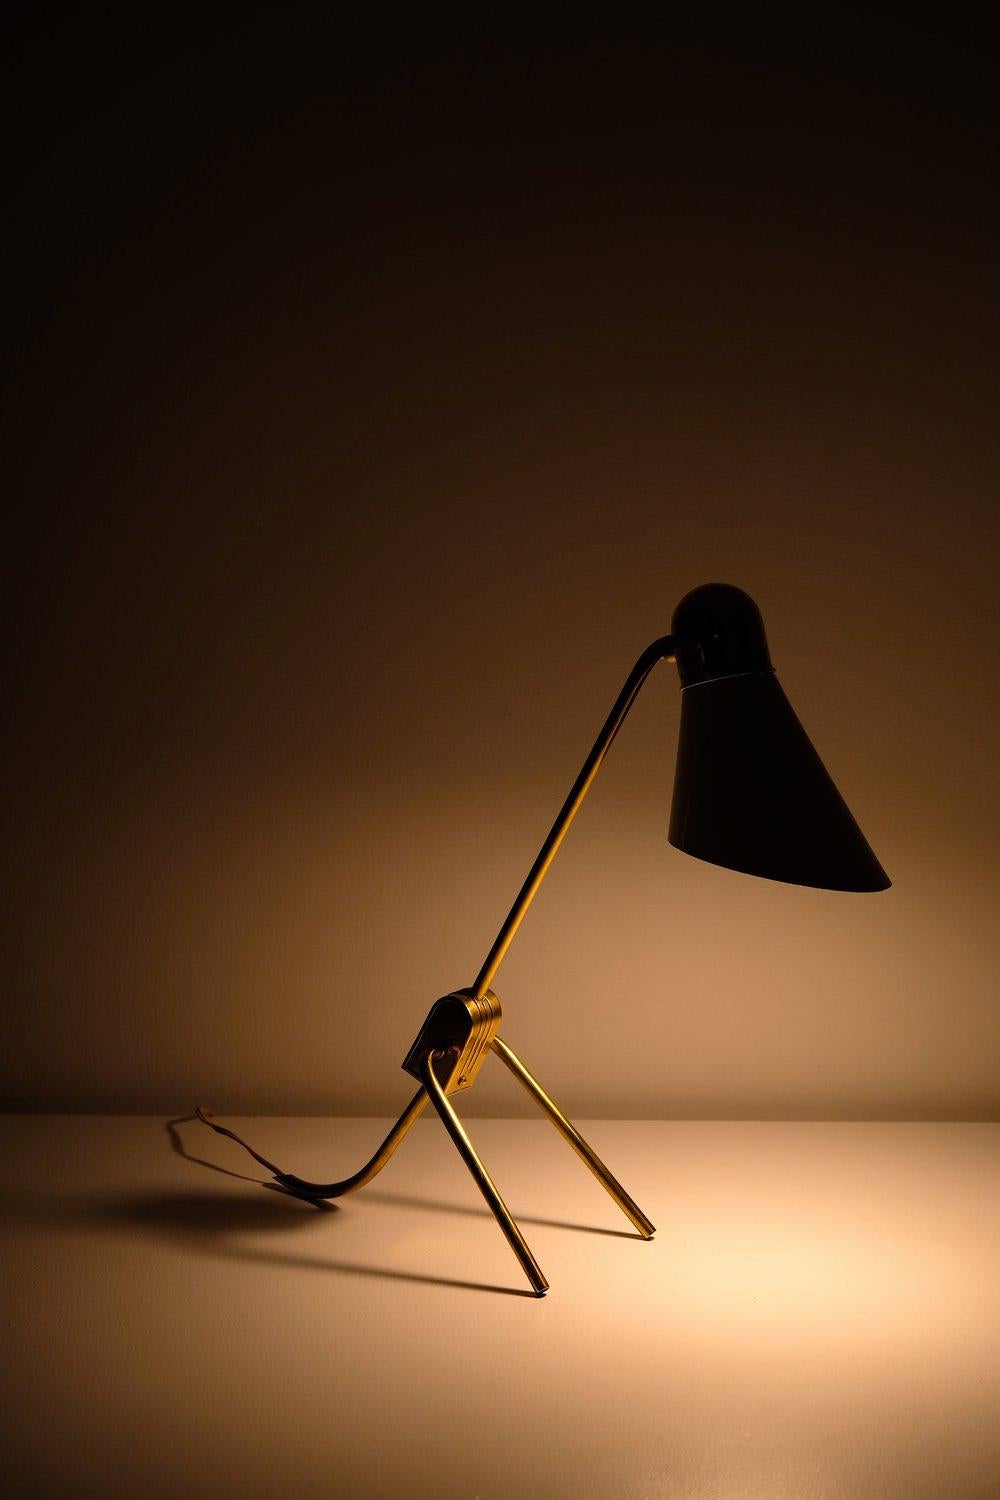 Iconic desk lamp by André Mounique/ Charlotte Perriand for Jumo, made in France. Polished solid brass body, lacquered aluminium shade, solid brass fittings, 40 watts max E-14 European bulb recommended or higher if LED/CFL.